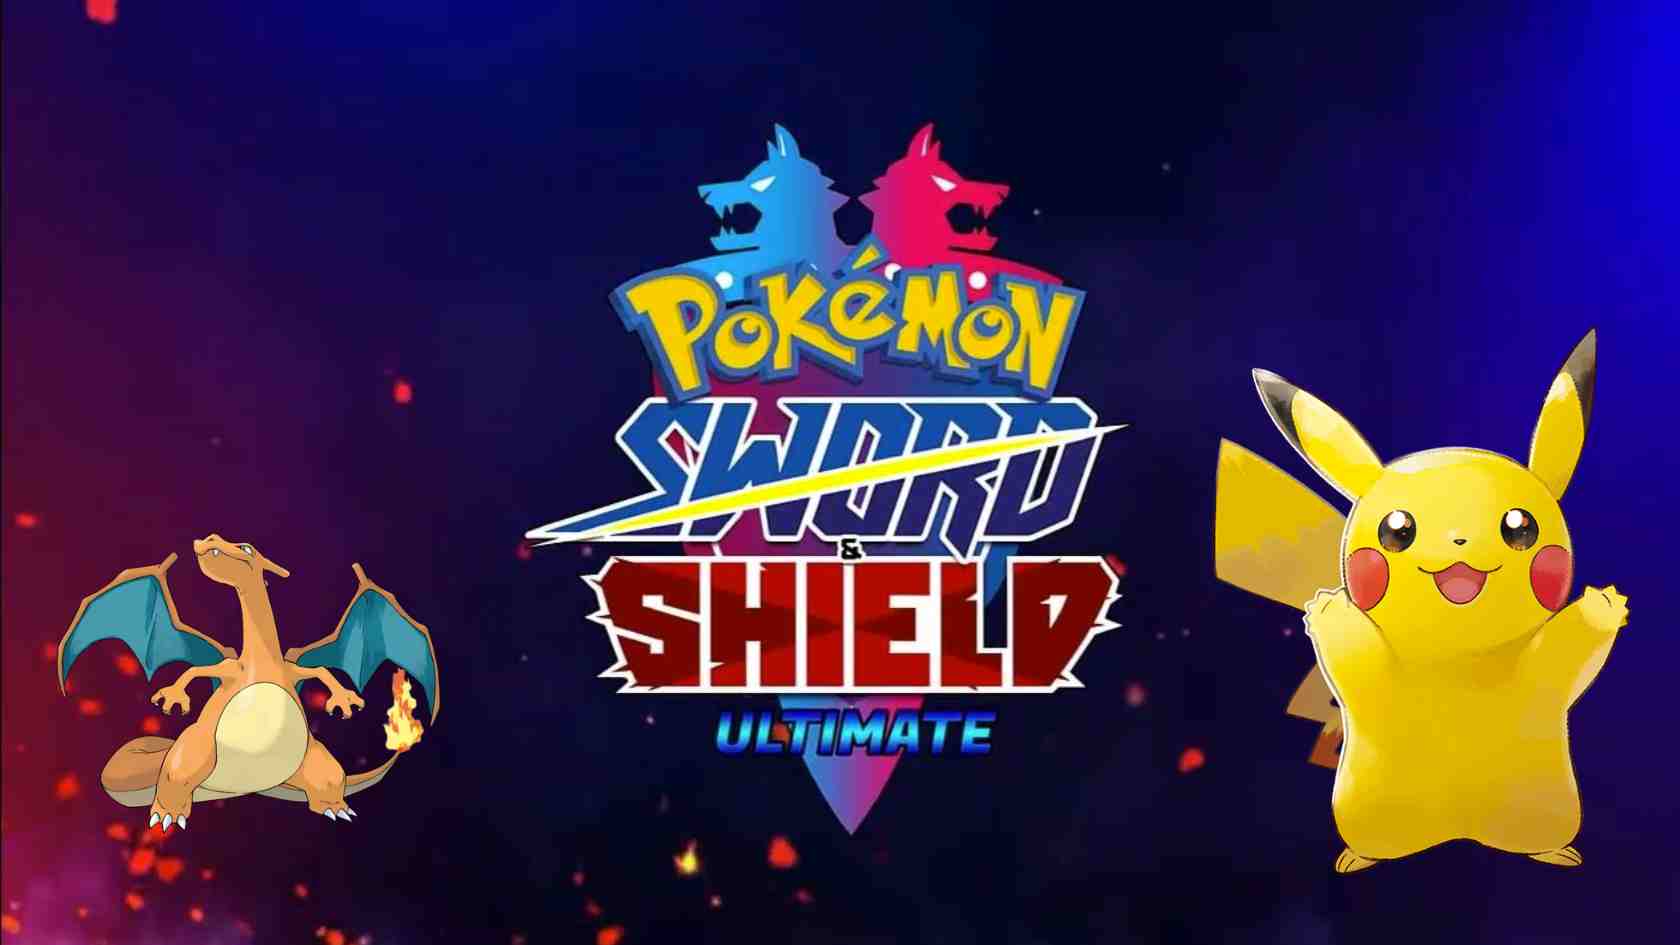 Pokemon Sword and Shield Ultimate GBA Newer 1.5v Download For Free